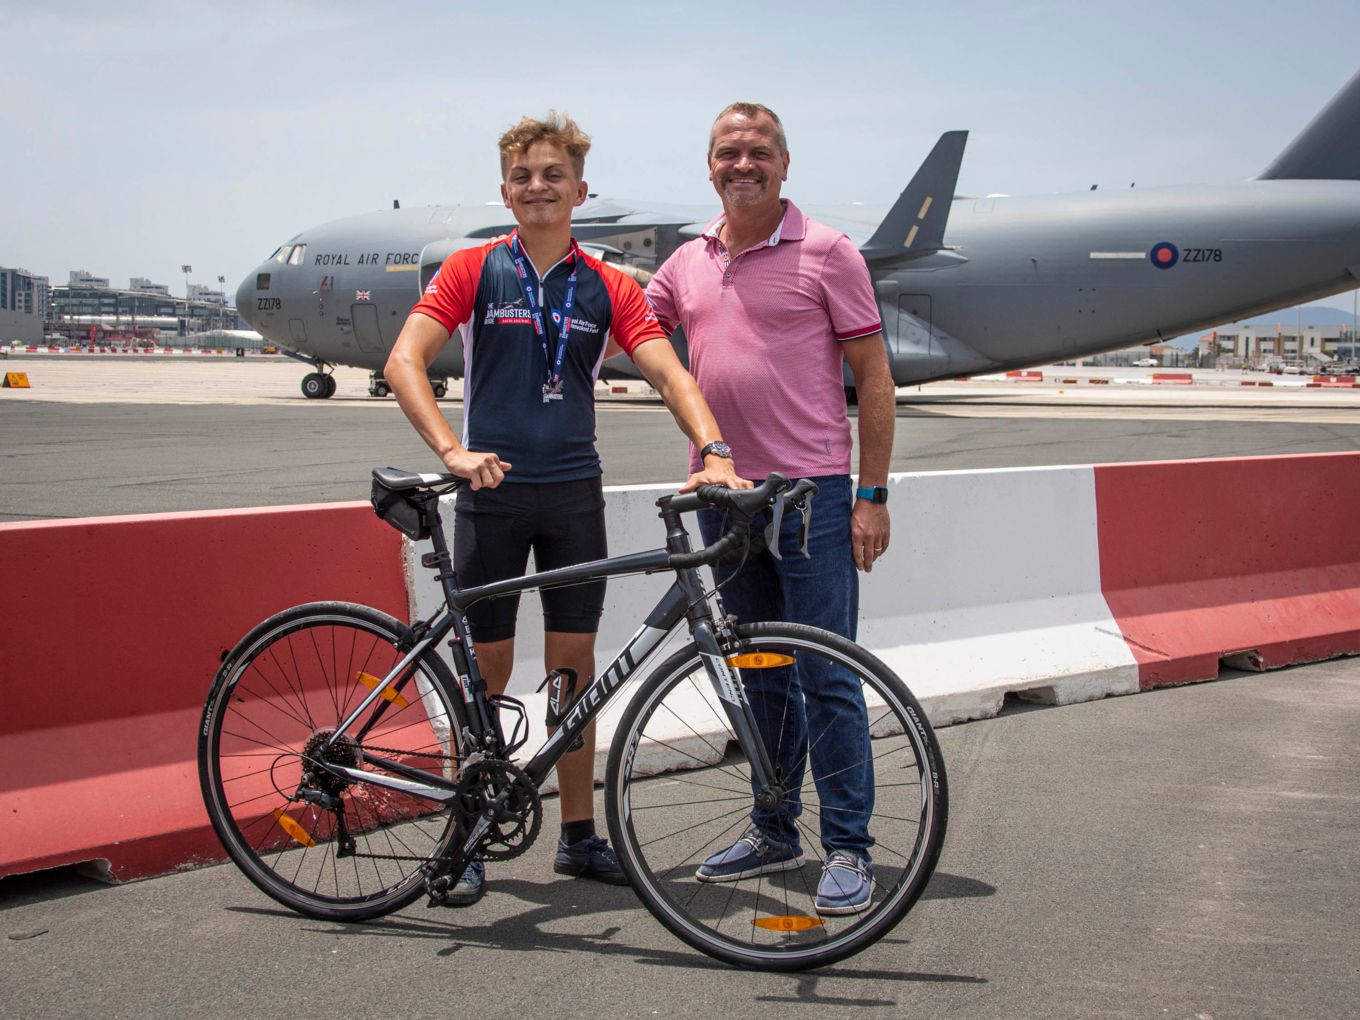 Oliver and his dad stand with his bicycle and a Globemaster in the background.